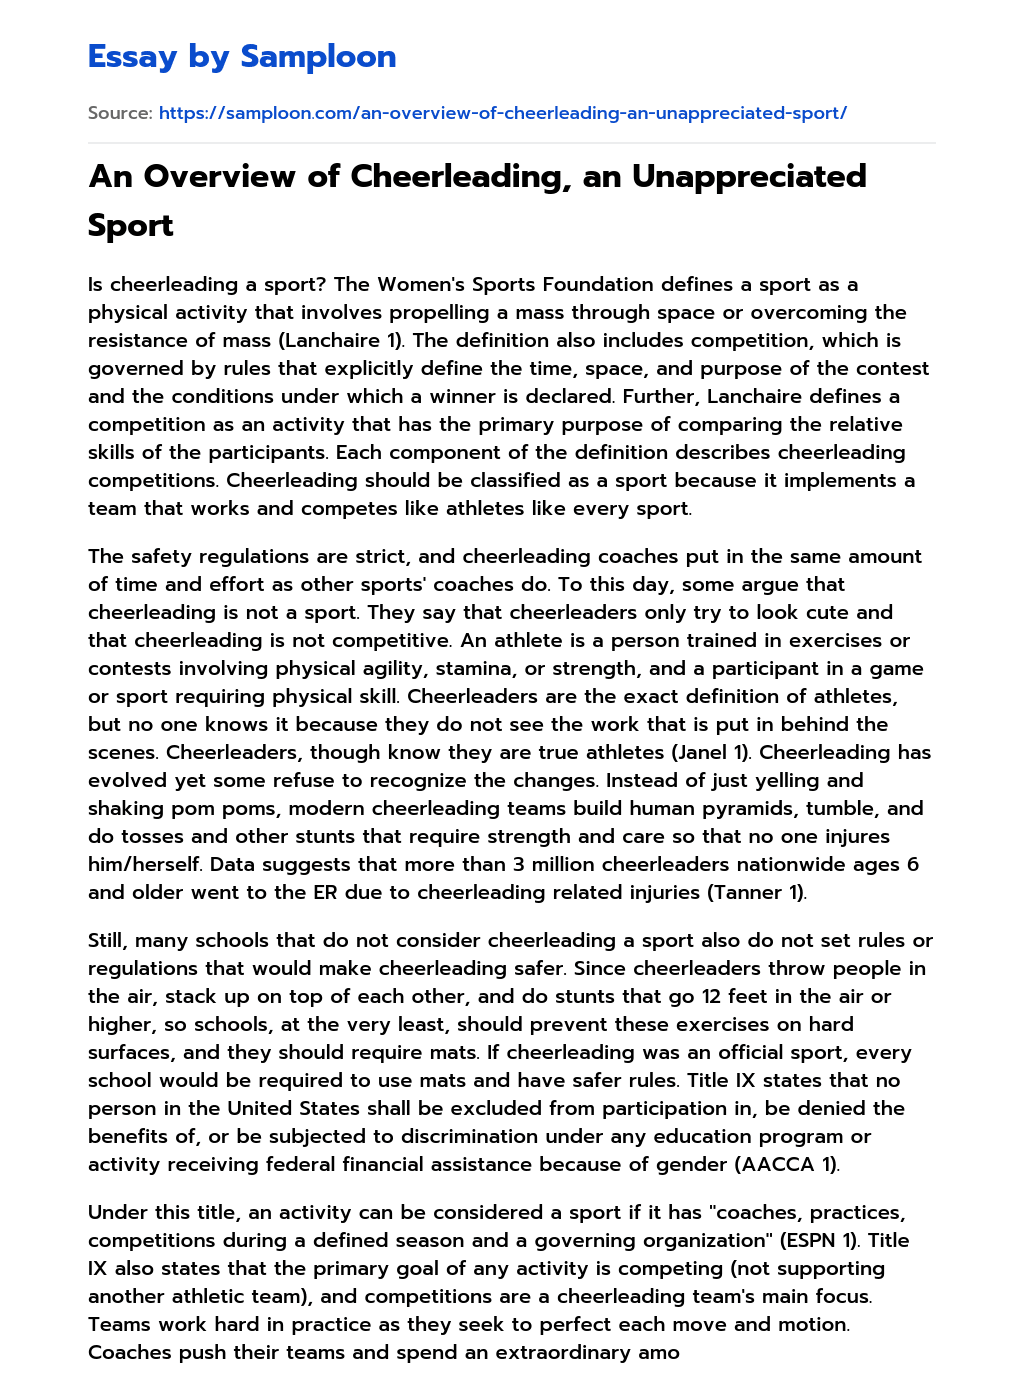 An Overview of Cheerleading, an Unappreciated Sport essay